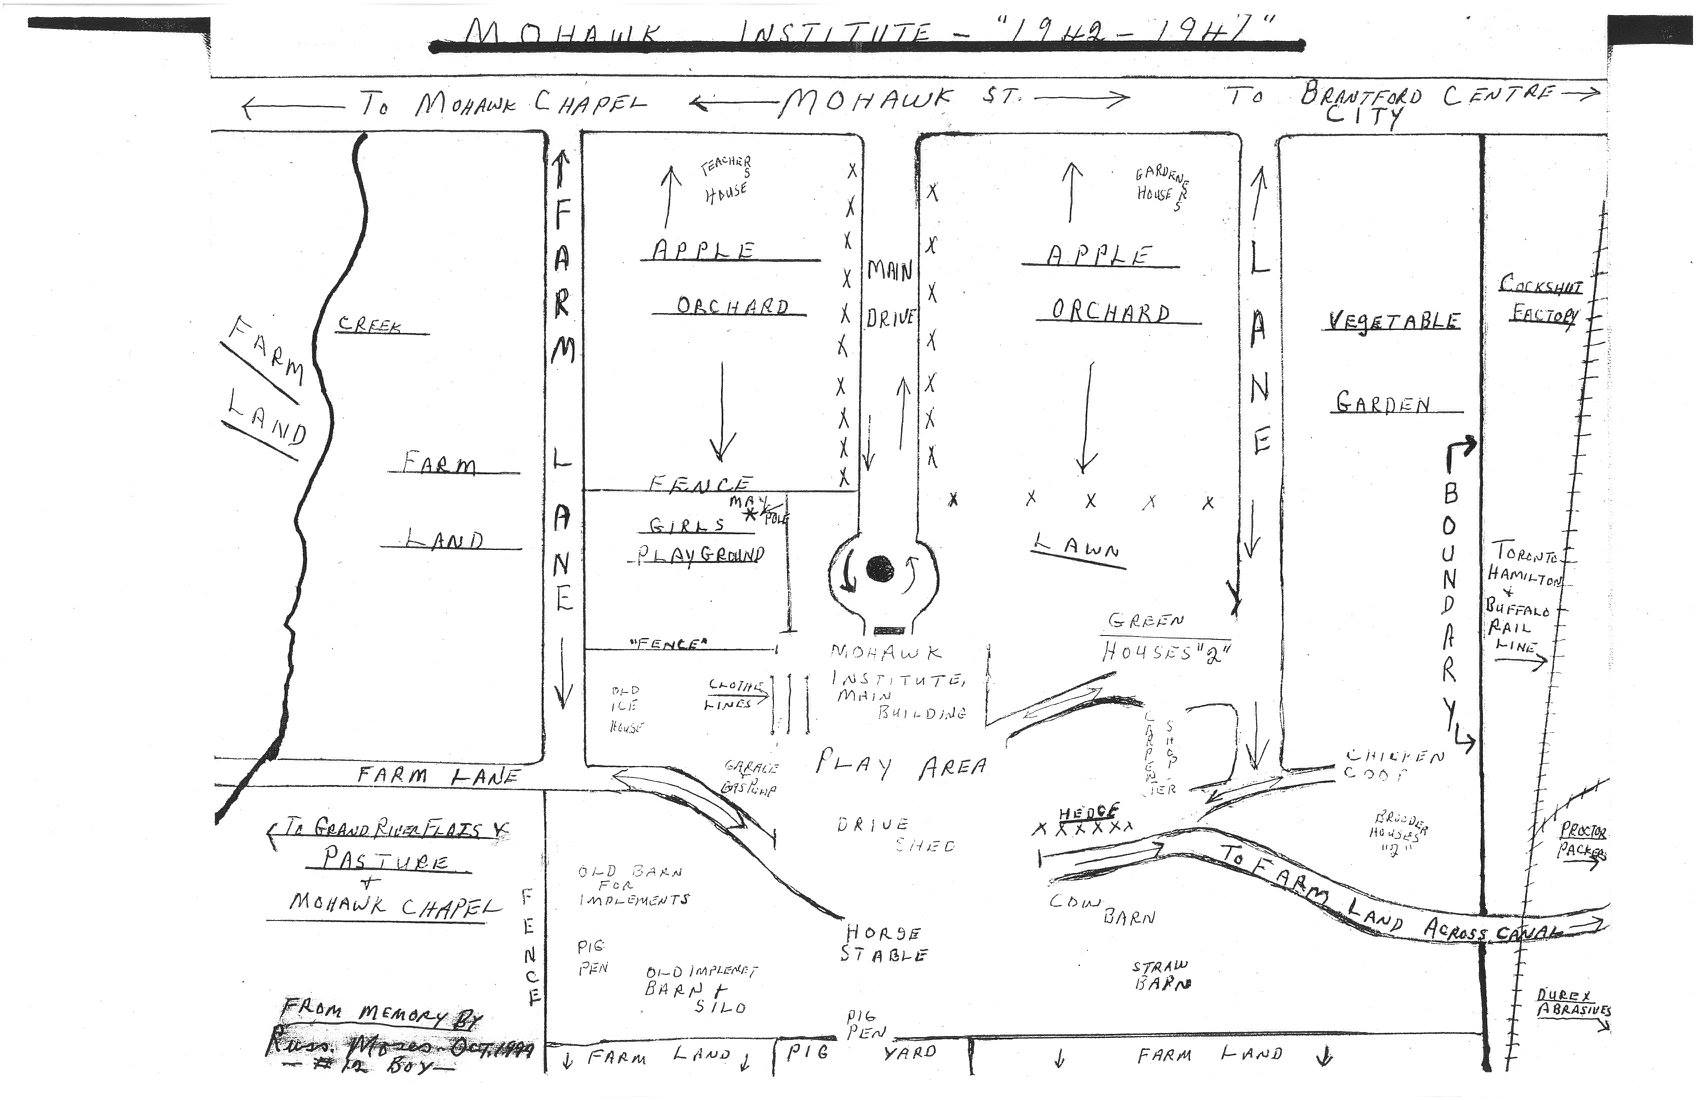 Hand-drawn map of Mohawk Institute by Russ Moses, 1999.You will notice that in the lower left corner that Russ signs his map with his residential school serial number, "# 12 Boy."